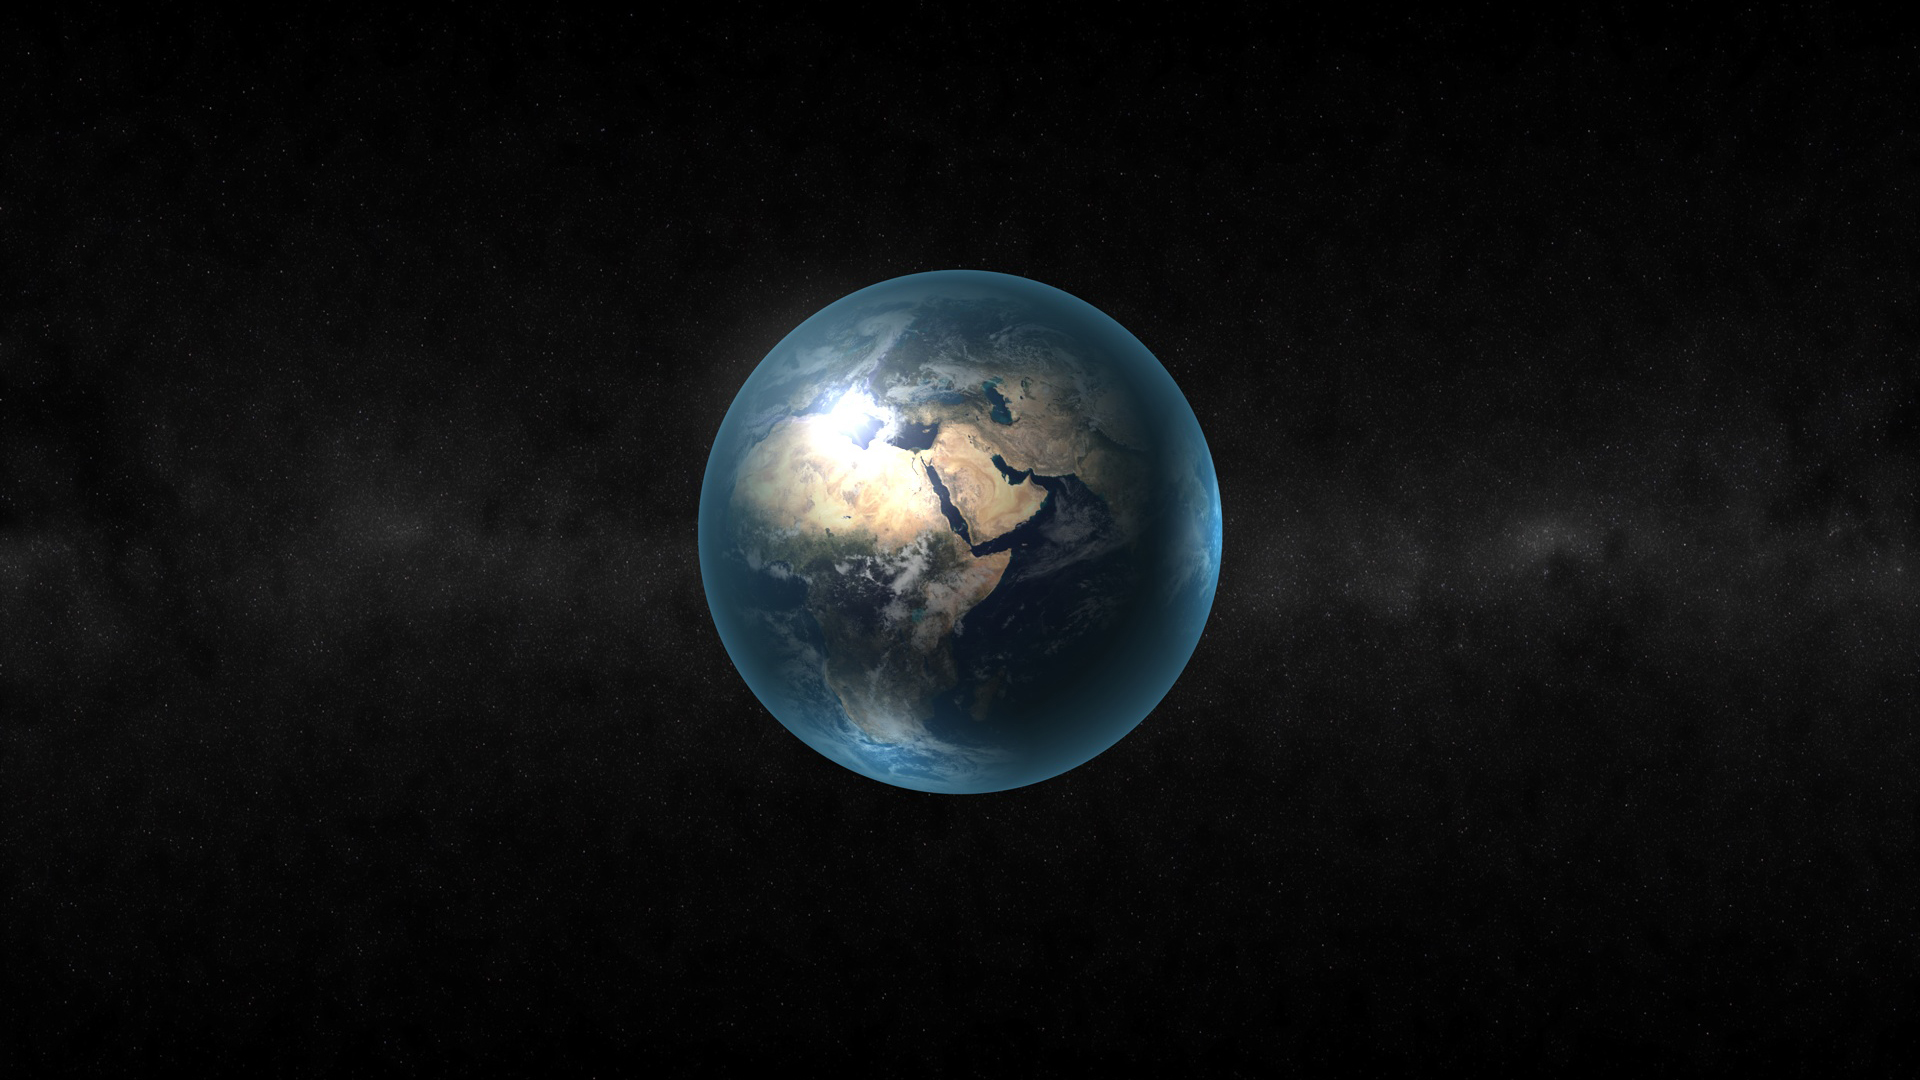 outer space, stars, planets, Earth, north, continents, Africa - desktop wallpaper